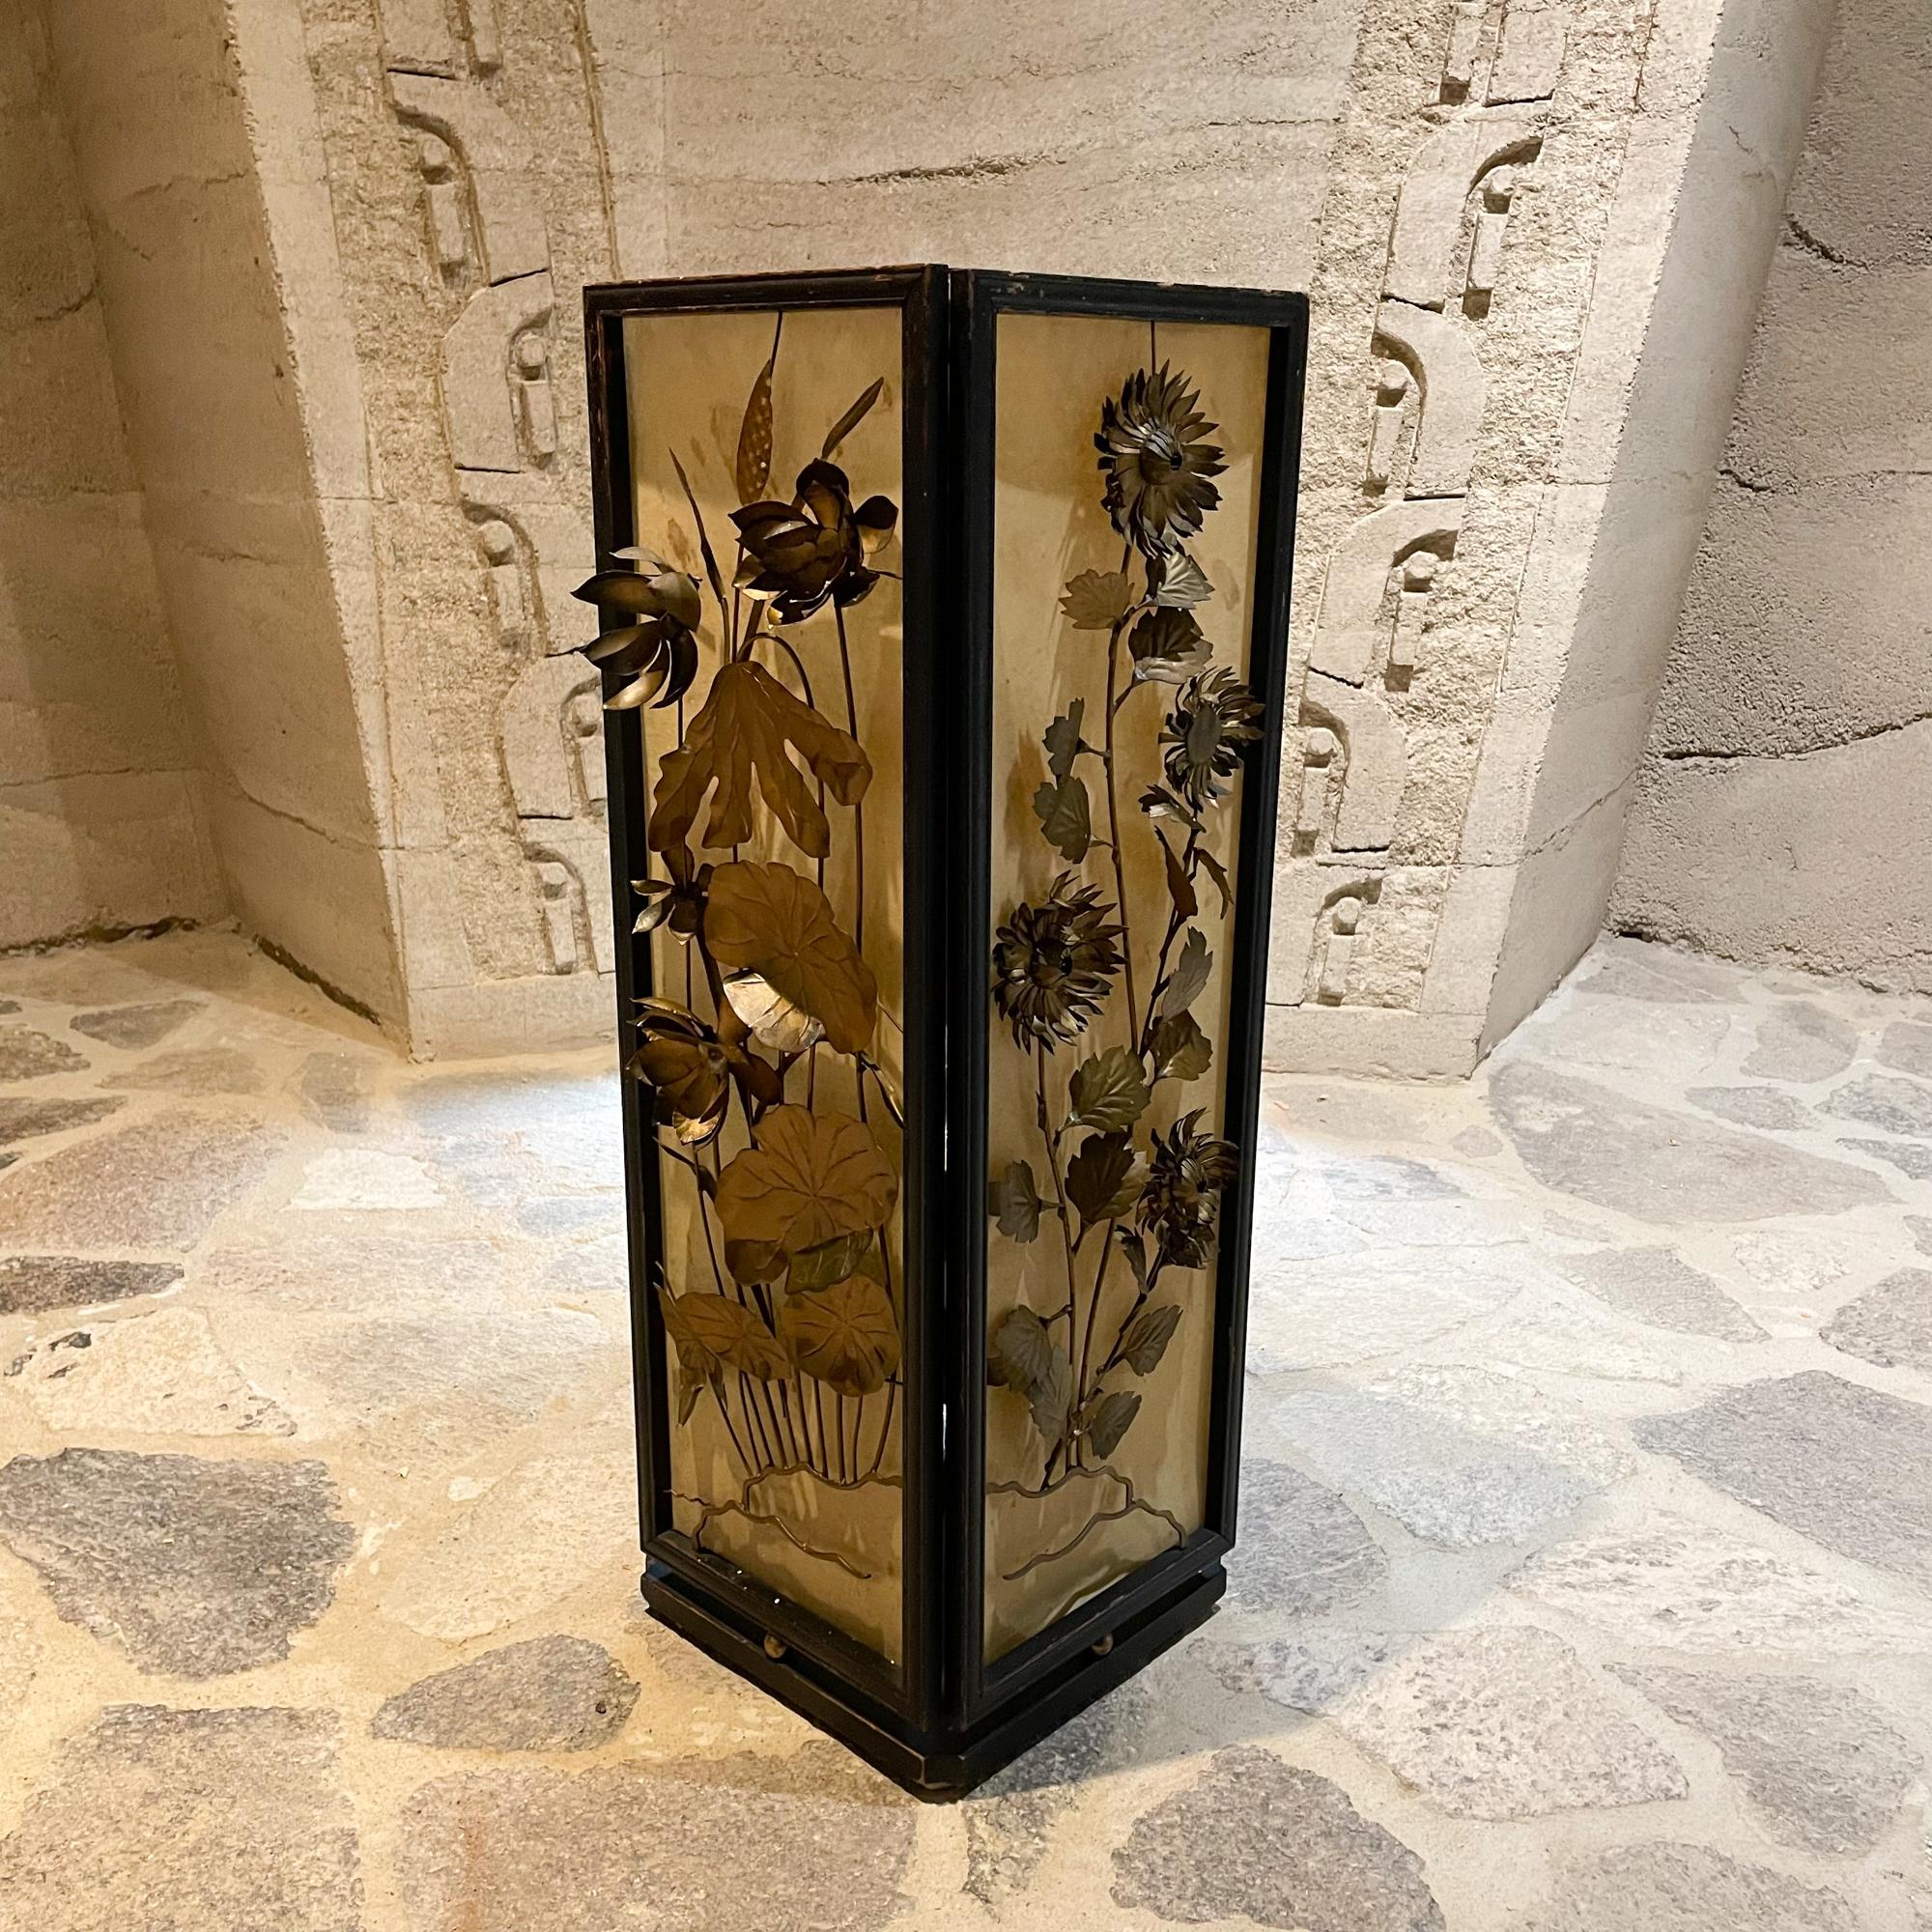 Exquisite Japanese Wood Lantern Table Lamp Unique Brass Flower Panels 1960s Asia For Sale 2